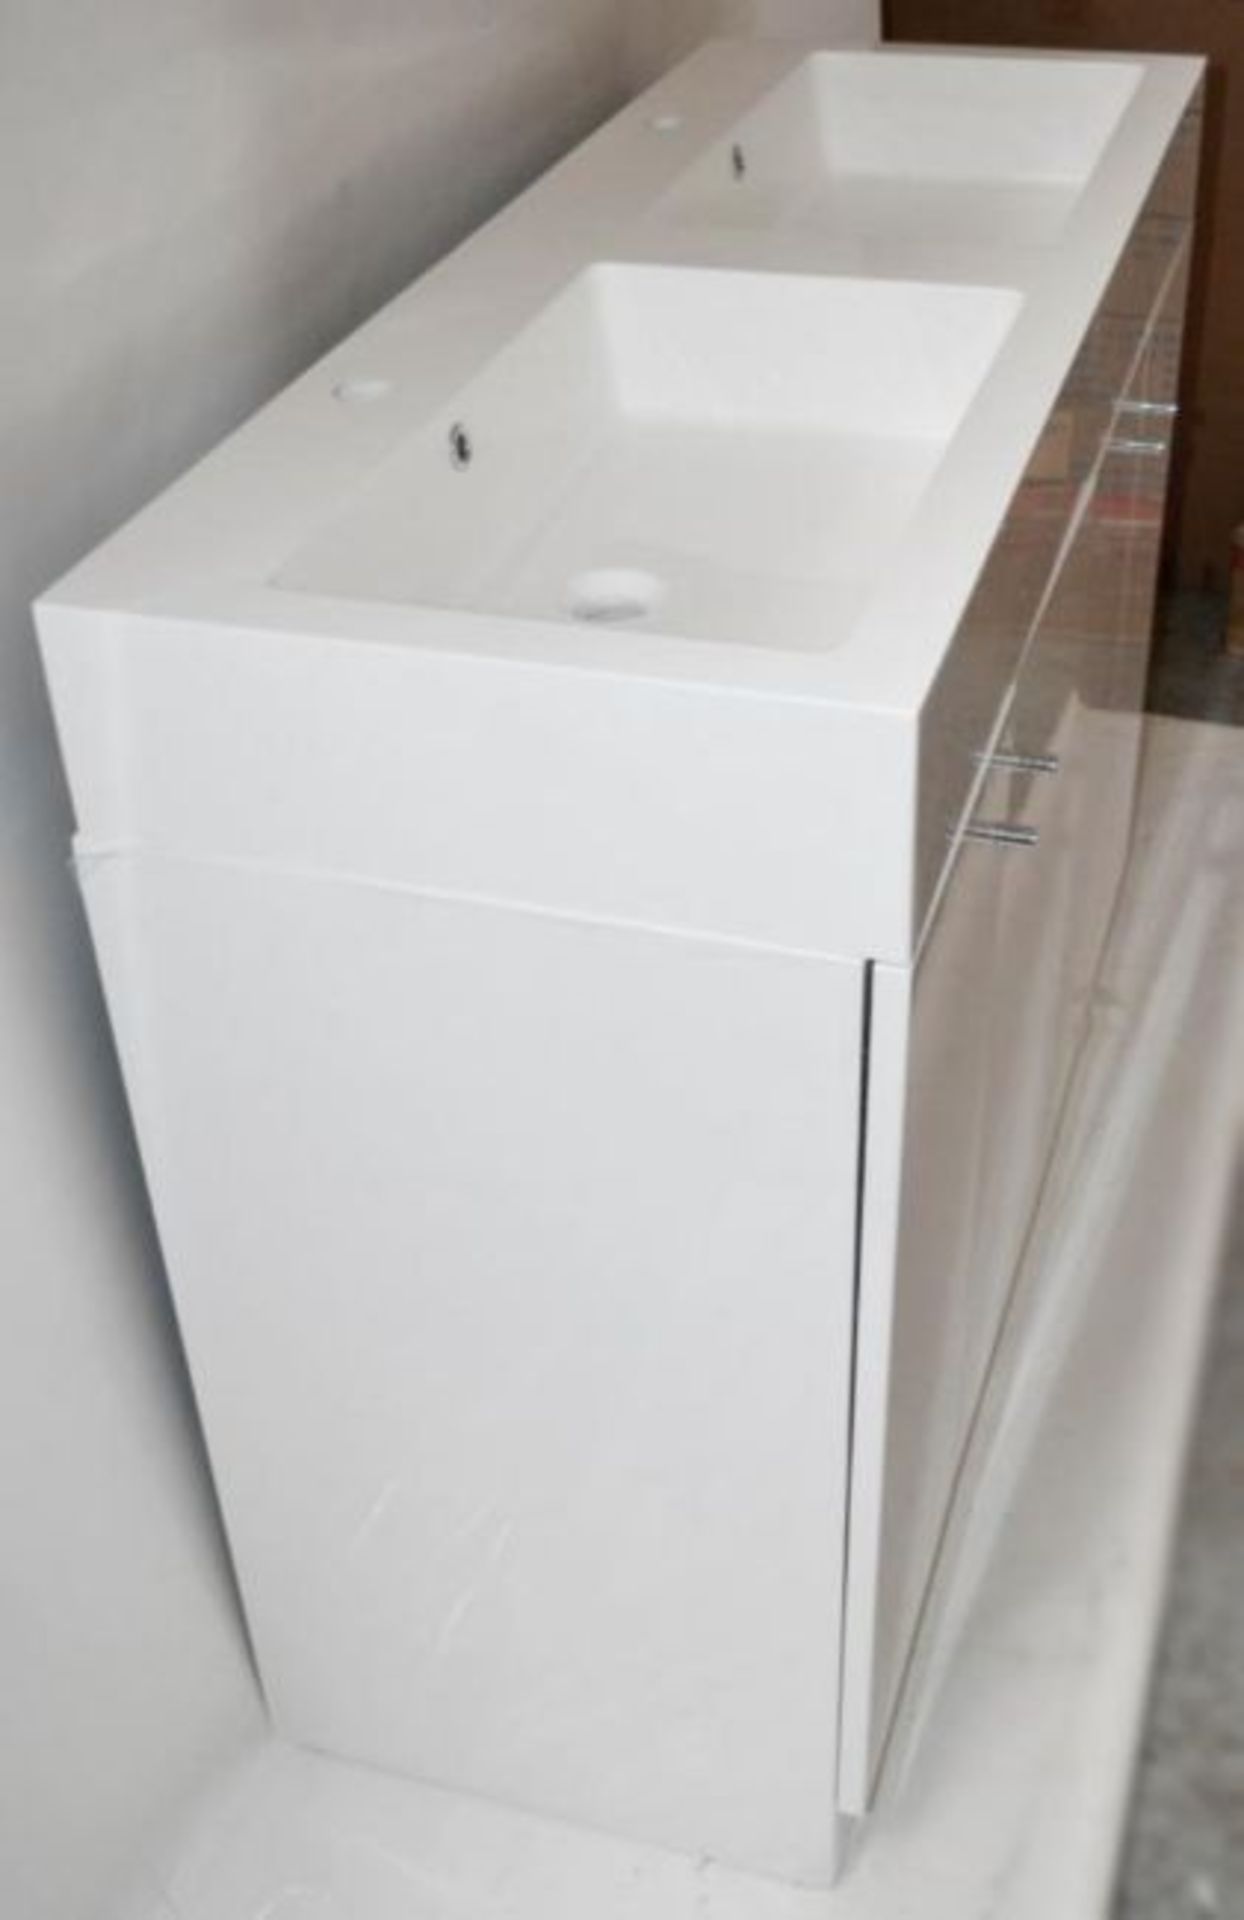 1 x Gloss White 1200mm 4-Door Double Basin Freestanding Bathroom Cabinet - New & Boxed Stock - CL307 - Image 7 of 7